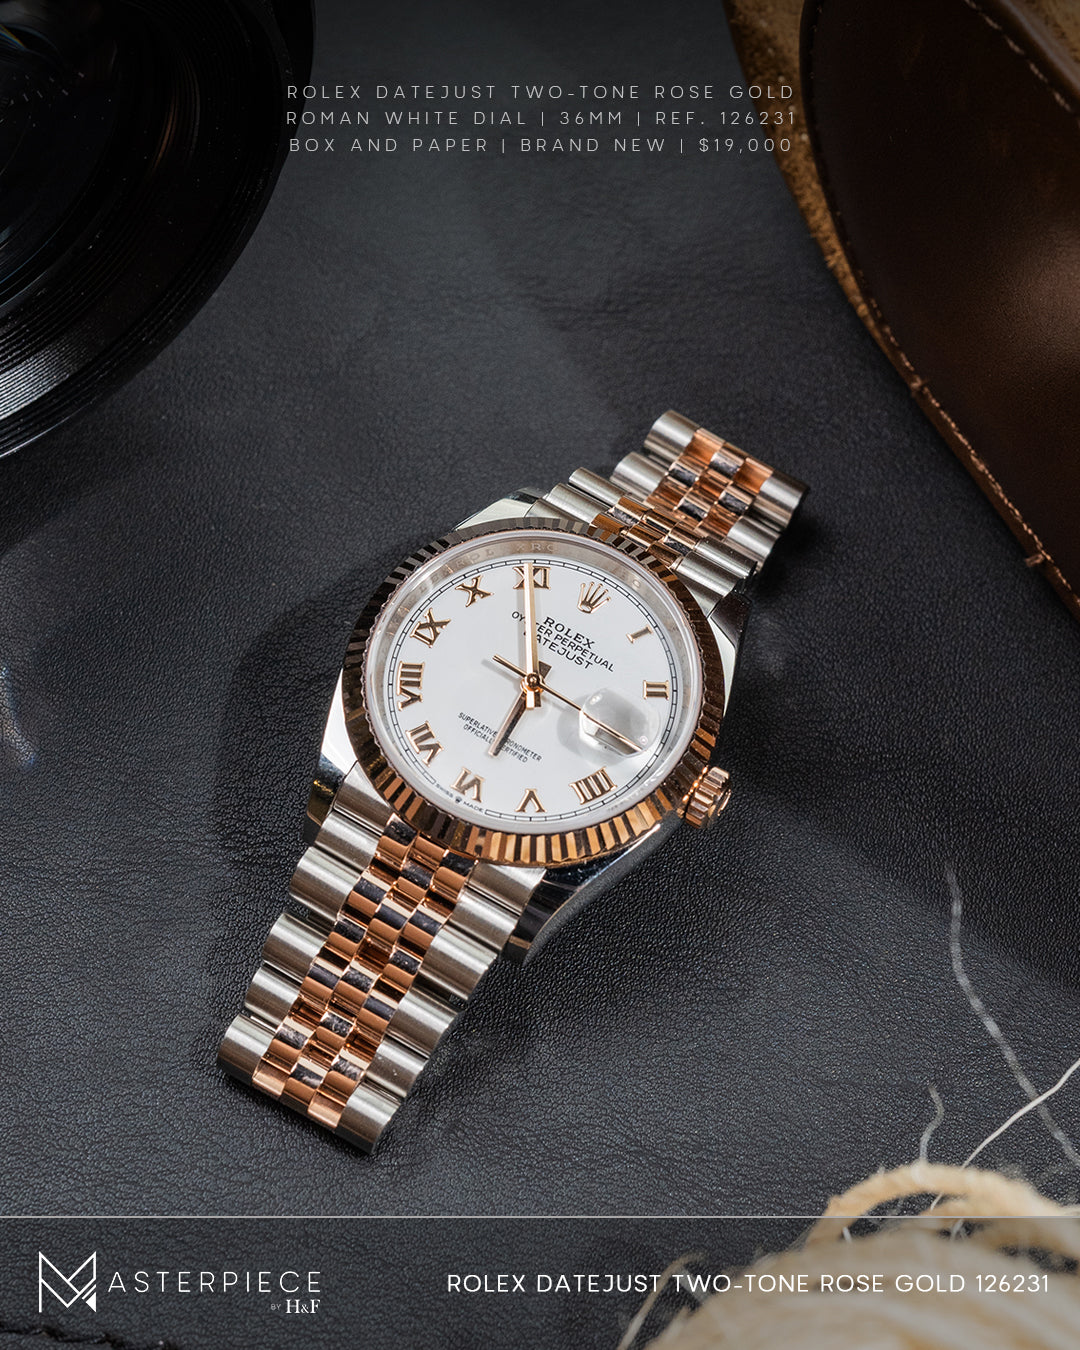 Rolex Datejust Two-Tone Rose Gold 126231 BRAND NEW